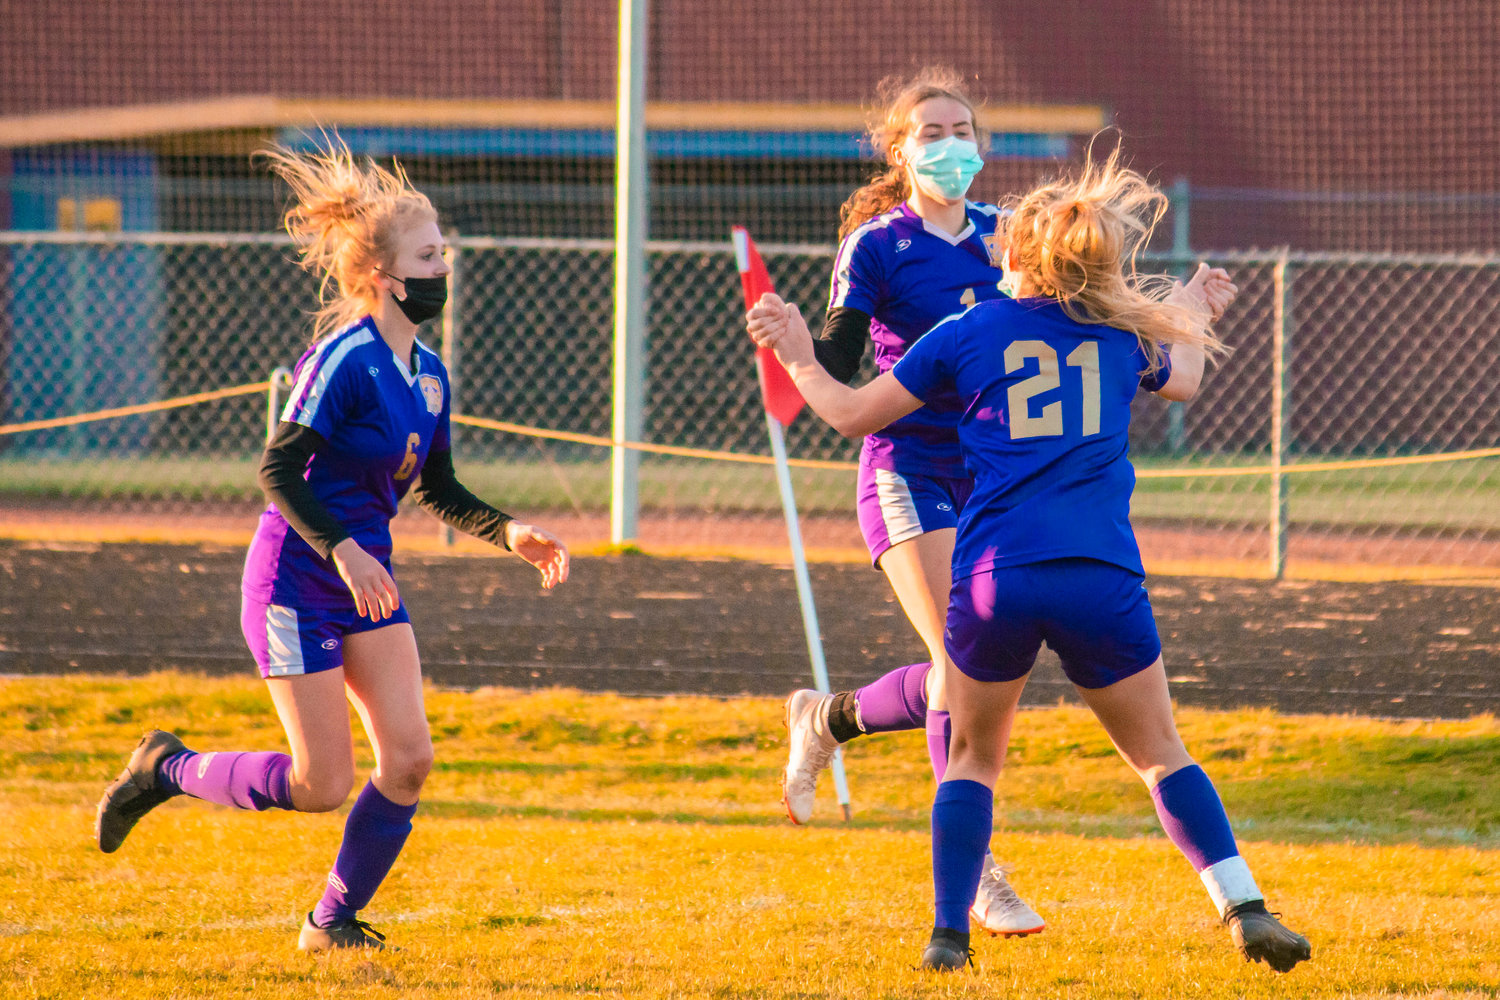 Onalaska athletes celebrate a goal during a game against Ocosta on Tuesday.